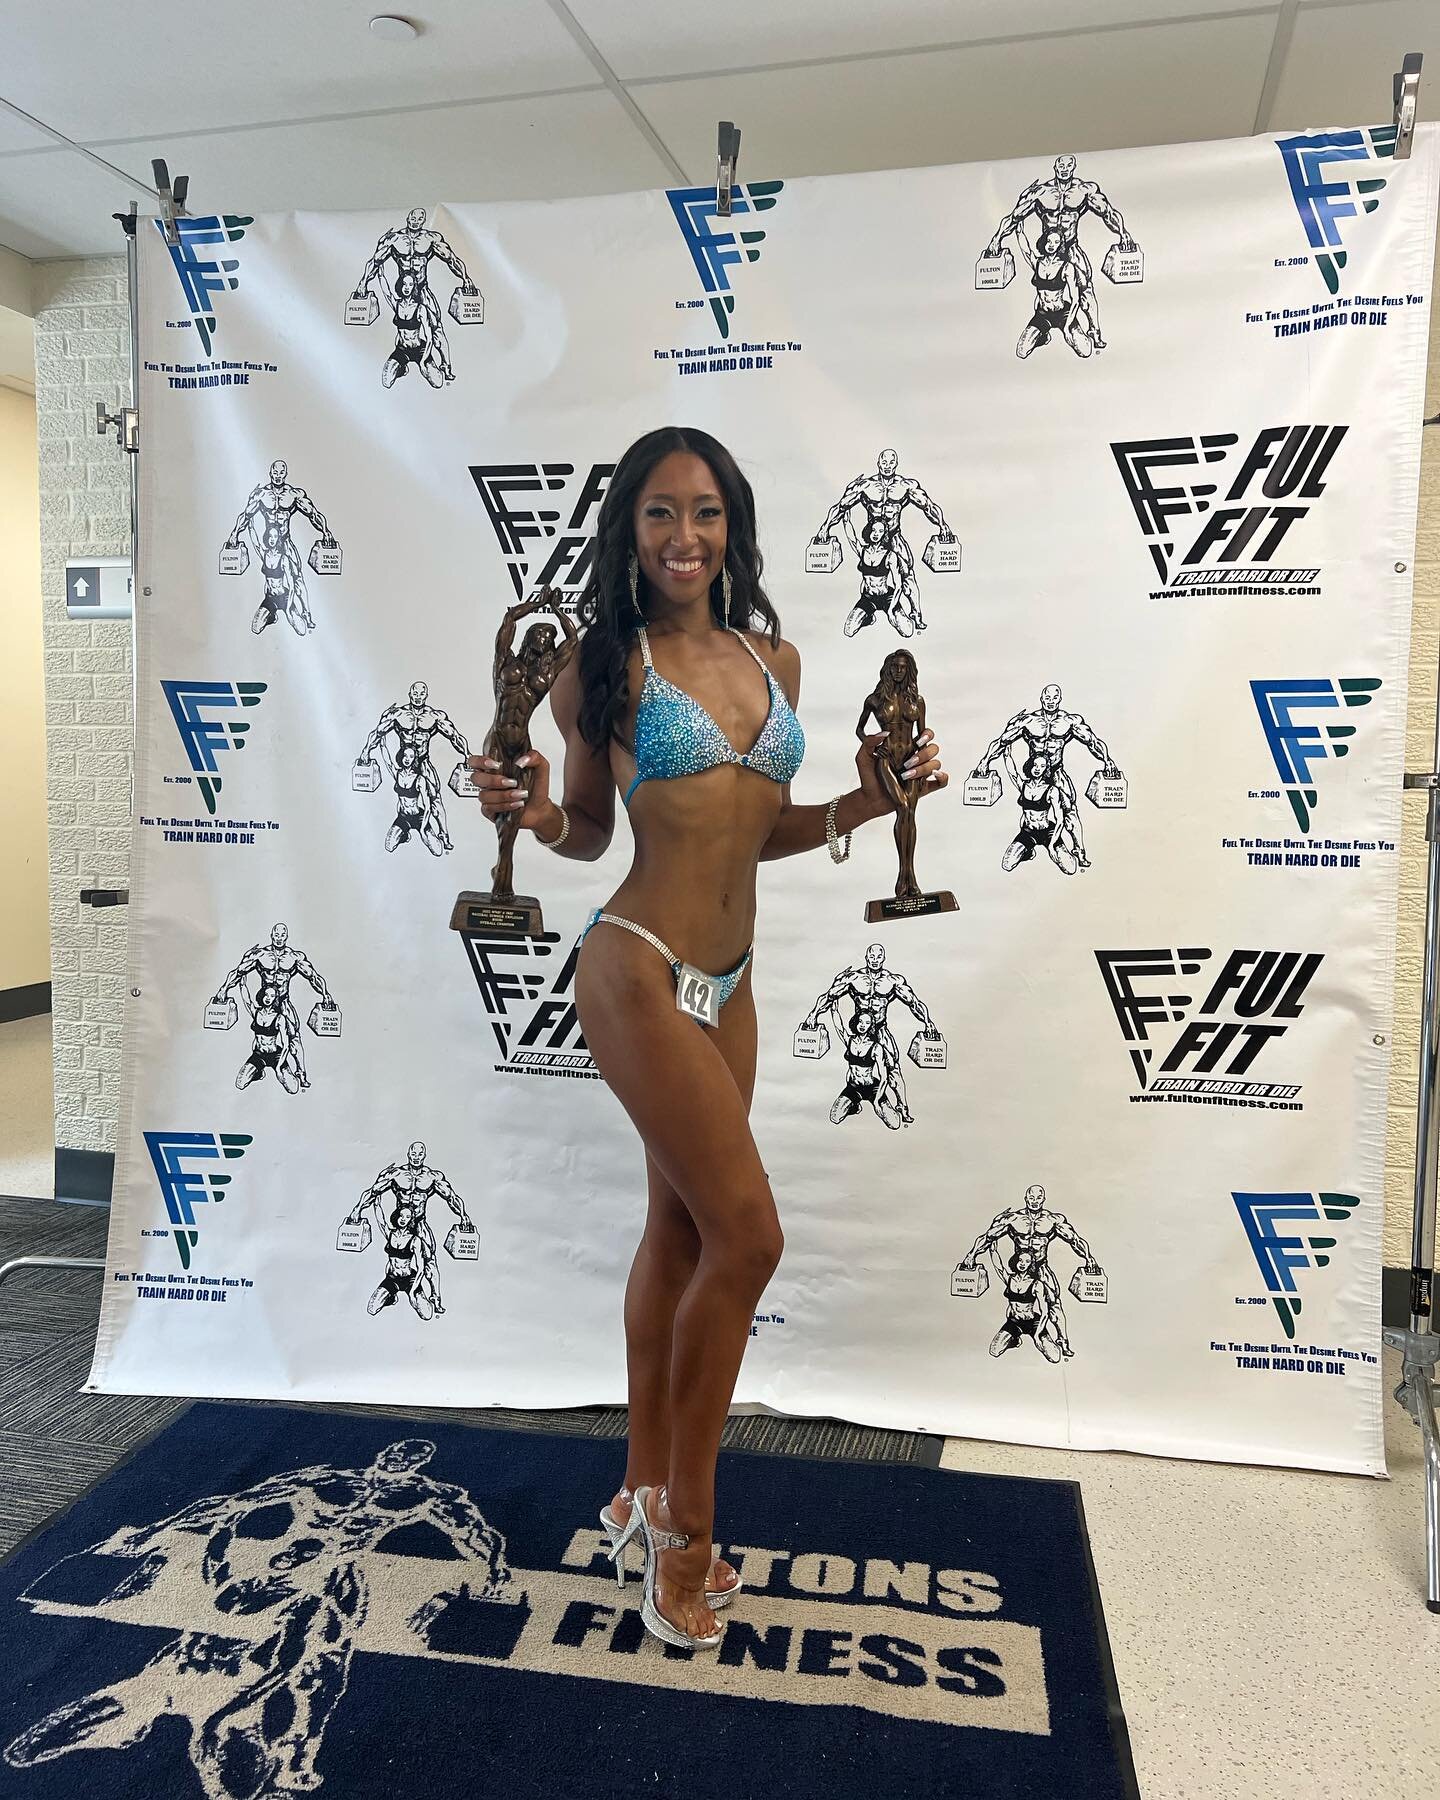 1st place overall winner!!!!

Thank you to my parents, brilliant trainer @livingholisticallywell , and everyone else who supported me🤍

Hair: @katherine_hair312 
Extensions: @metayerhair 
Makeup: @gtavzglam 
Tan: @metro_beauty_lounge_llc 
Bikini: @a